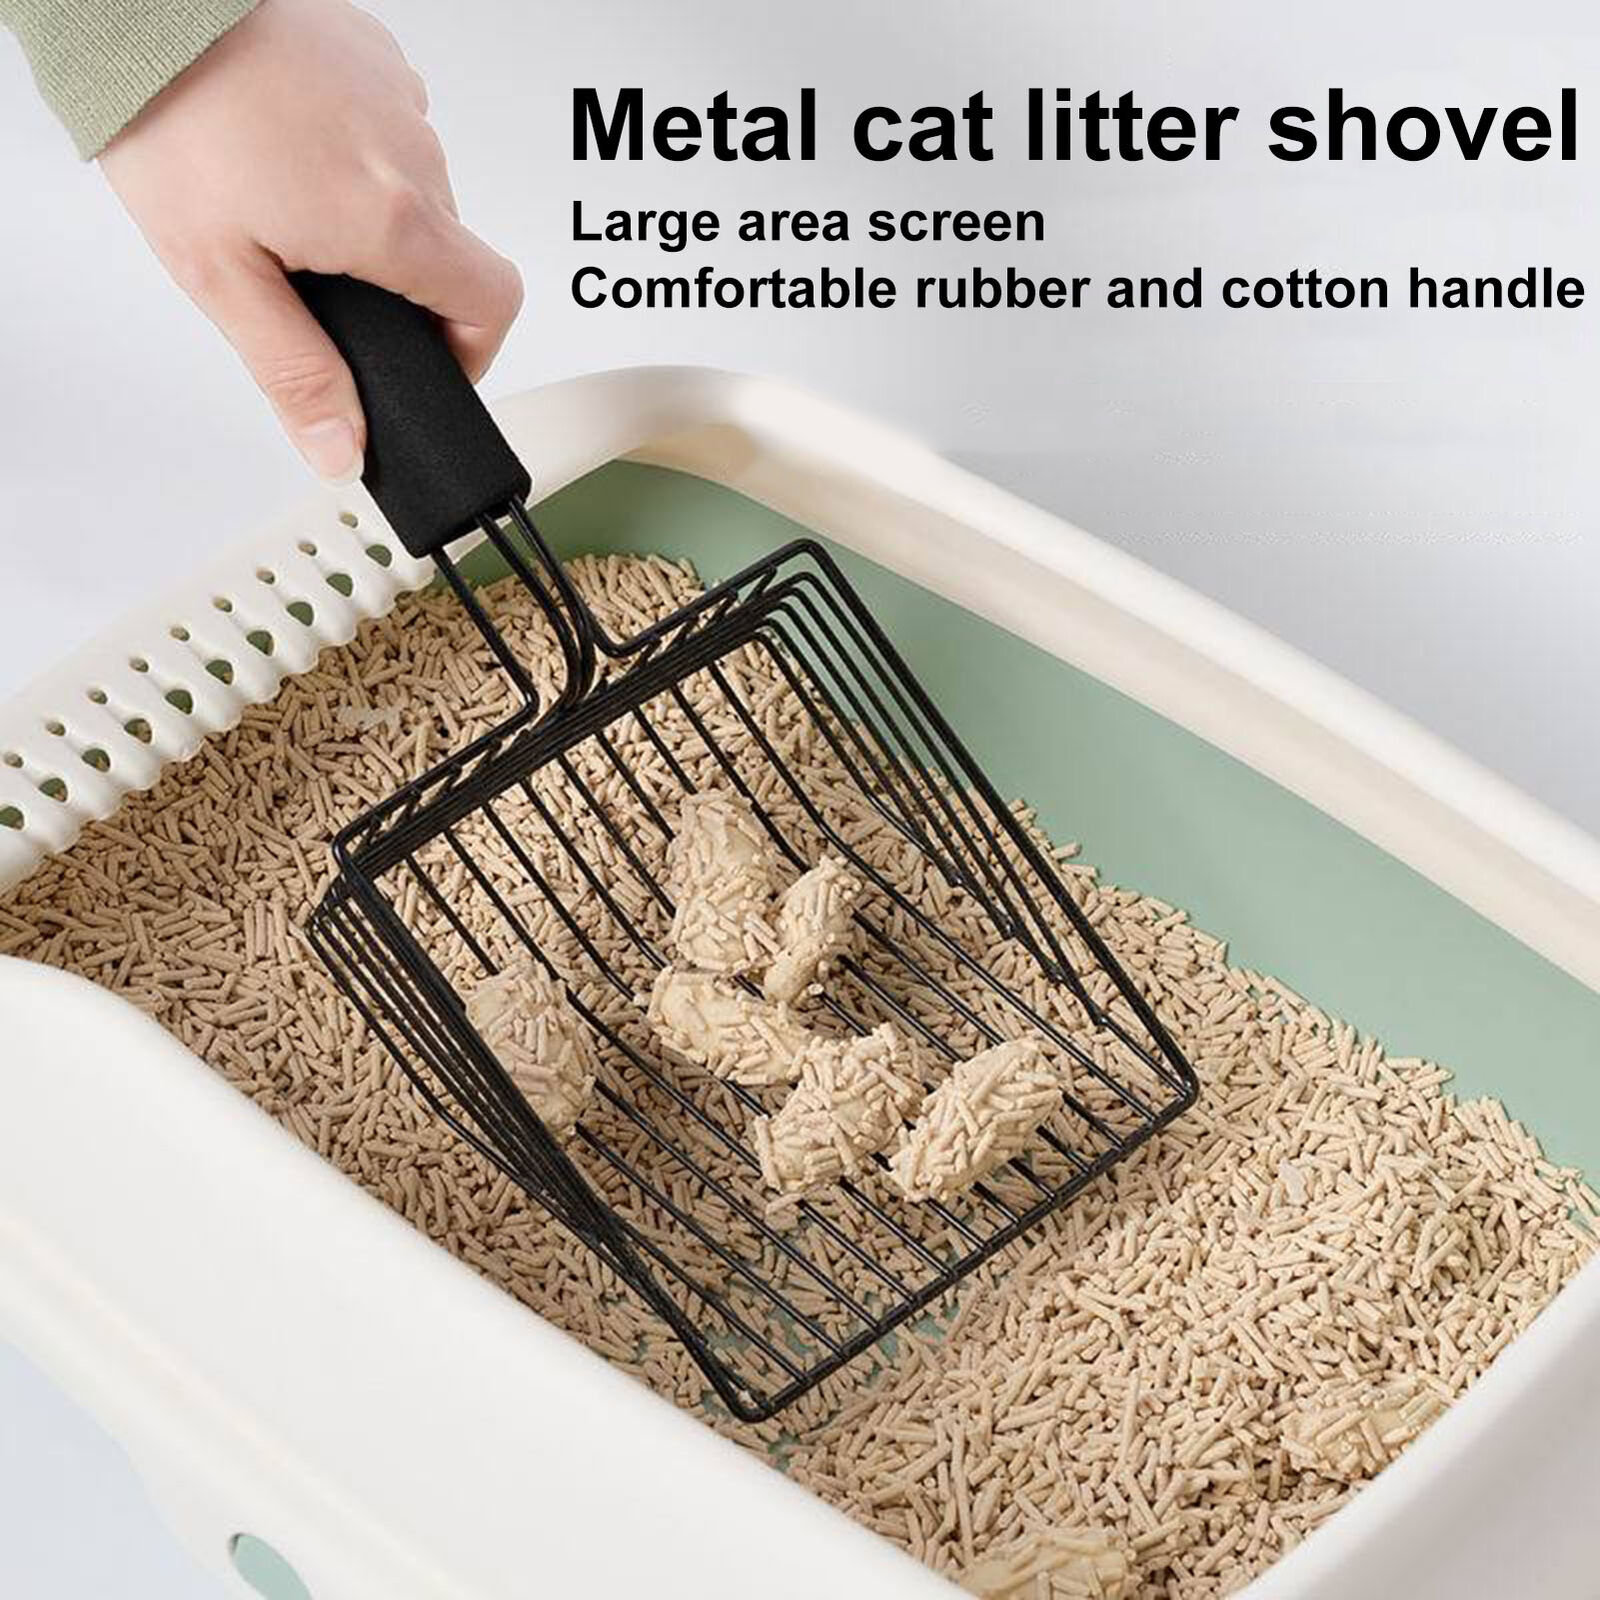 Cat Litter Shovel Reliable Tool Durable Non-stick Metal Scoop with Long Handle Unbranded